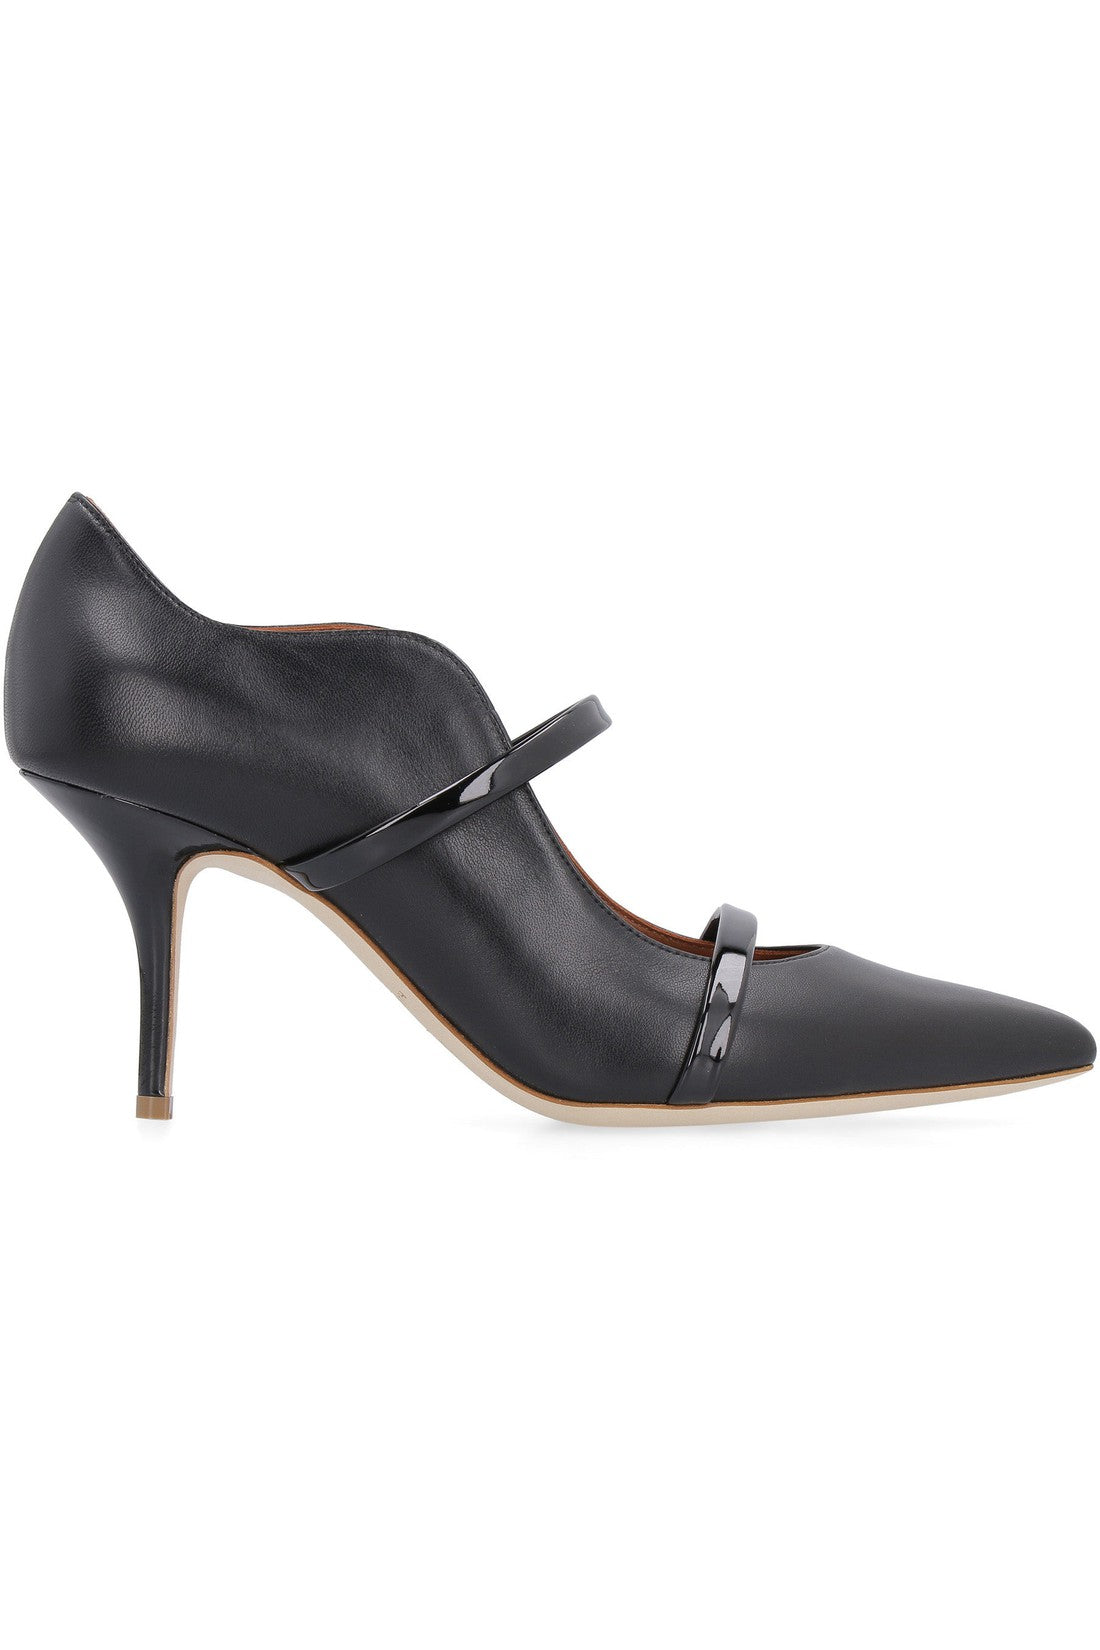 Malone Souliers-OUTLET-SALE-Maureen leather pointy-toe pumps-ARCHIVIST